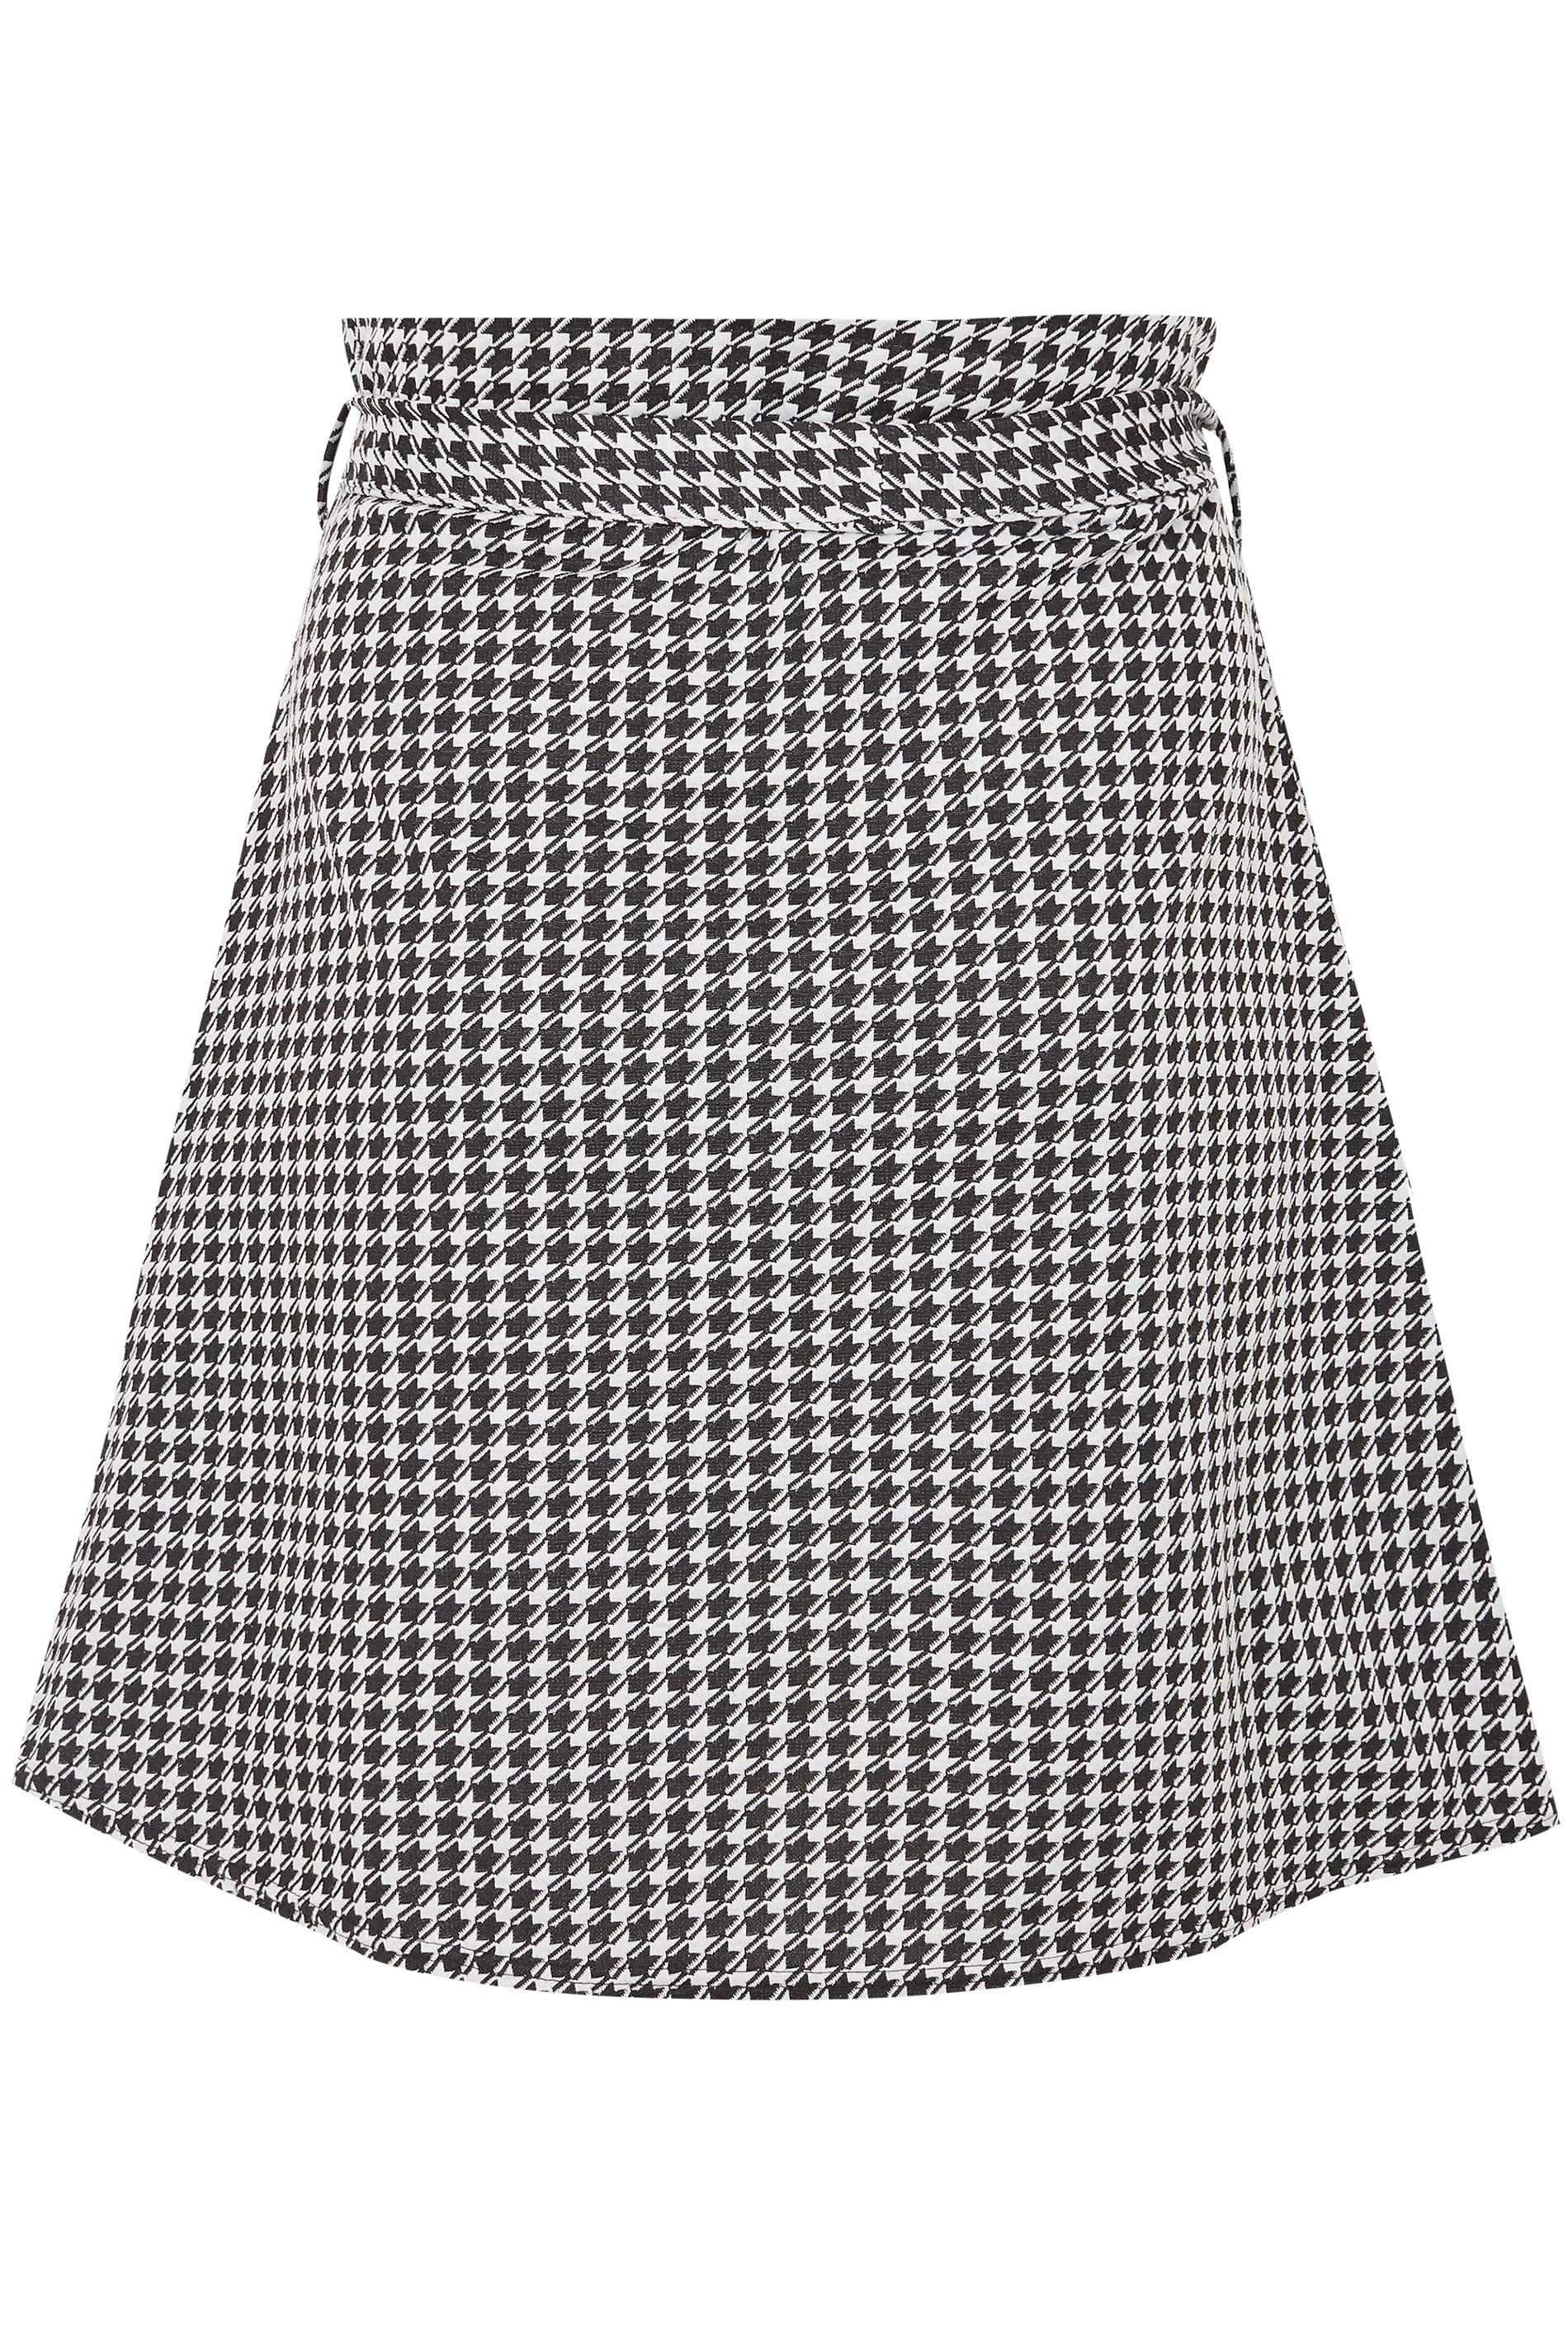 LIMITED COLLECTION Black & White Dogtooth Paperbag Skirt | Sizes 16 to ...